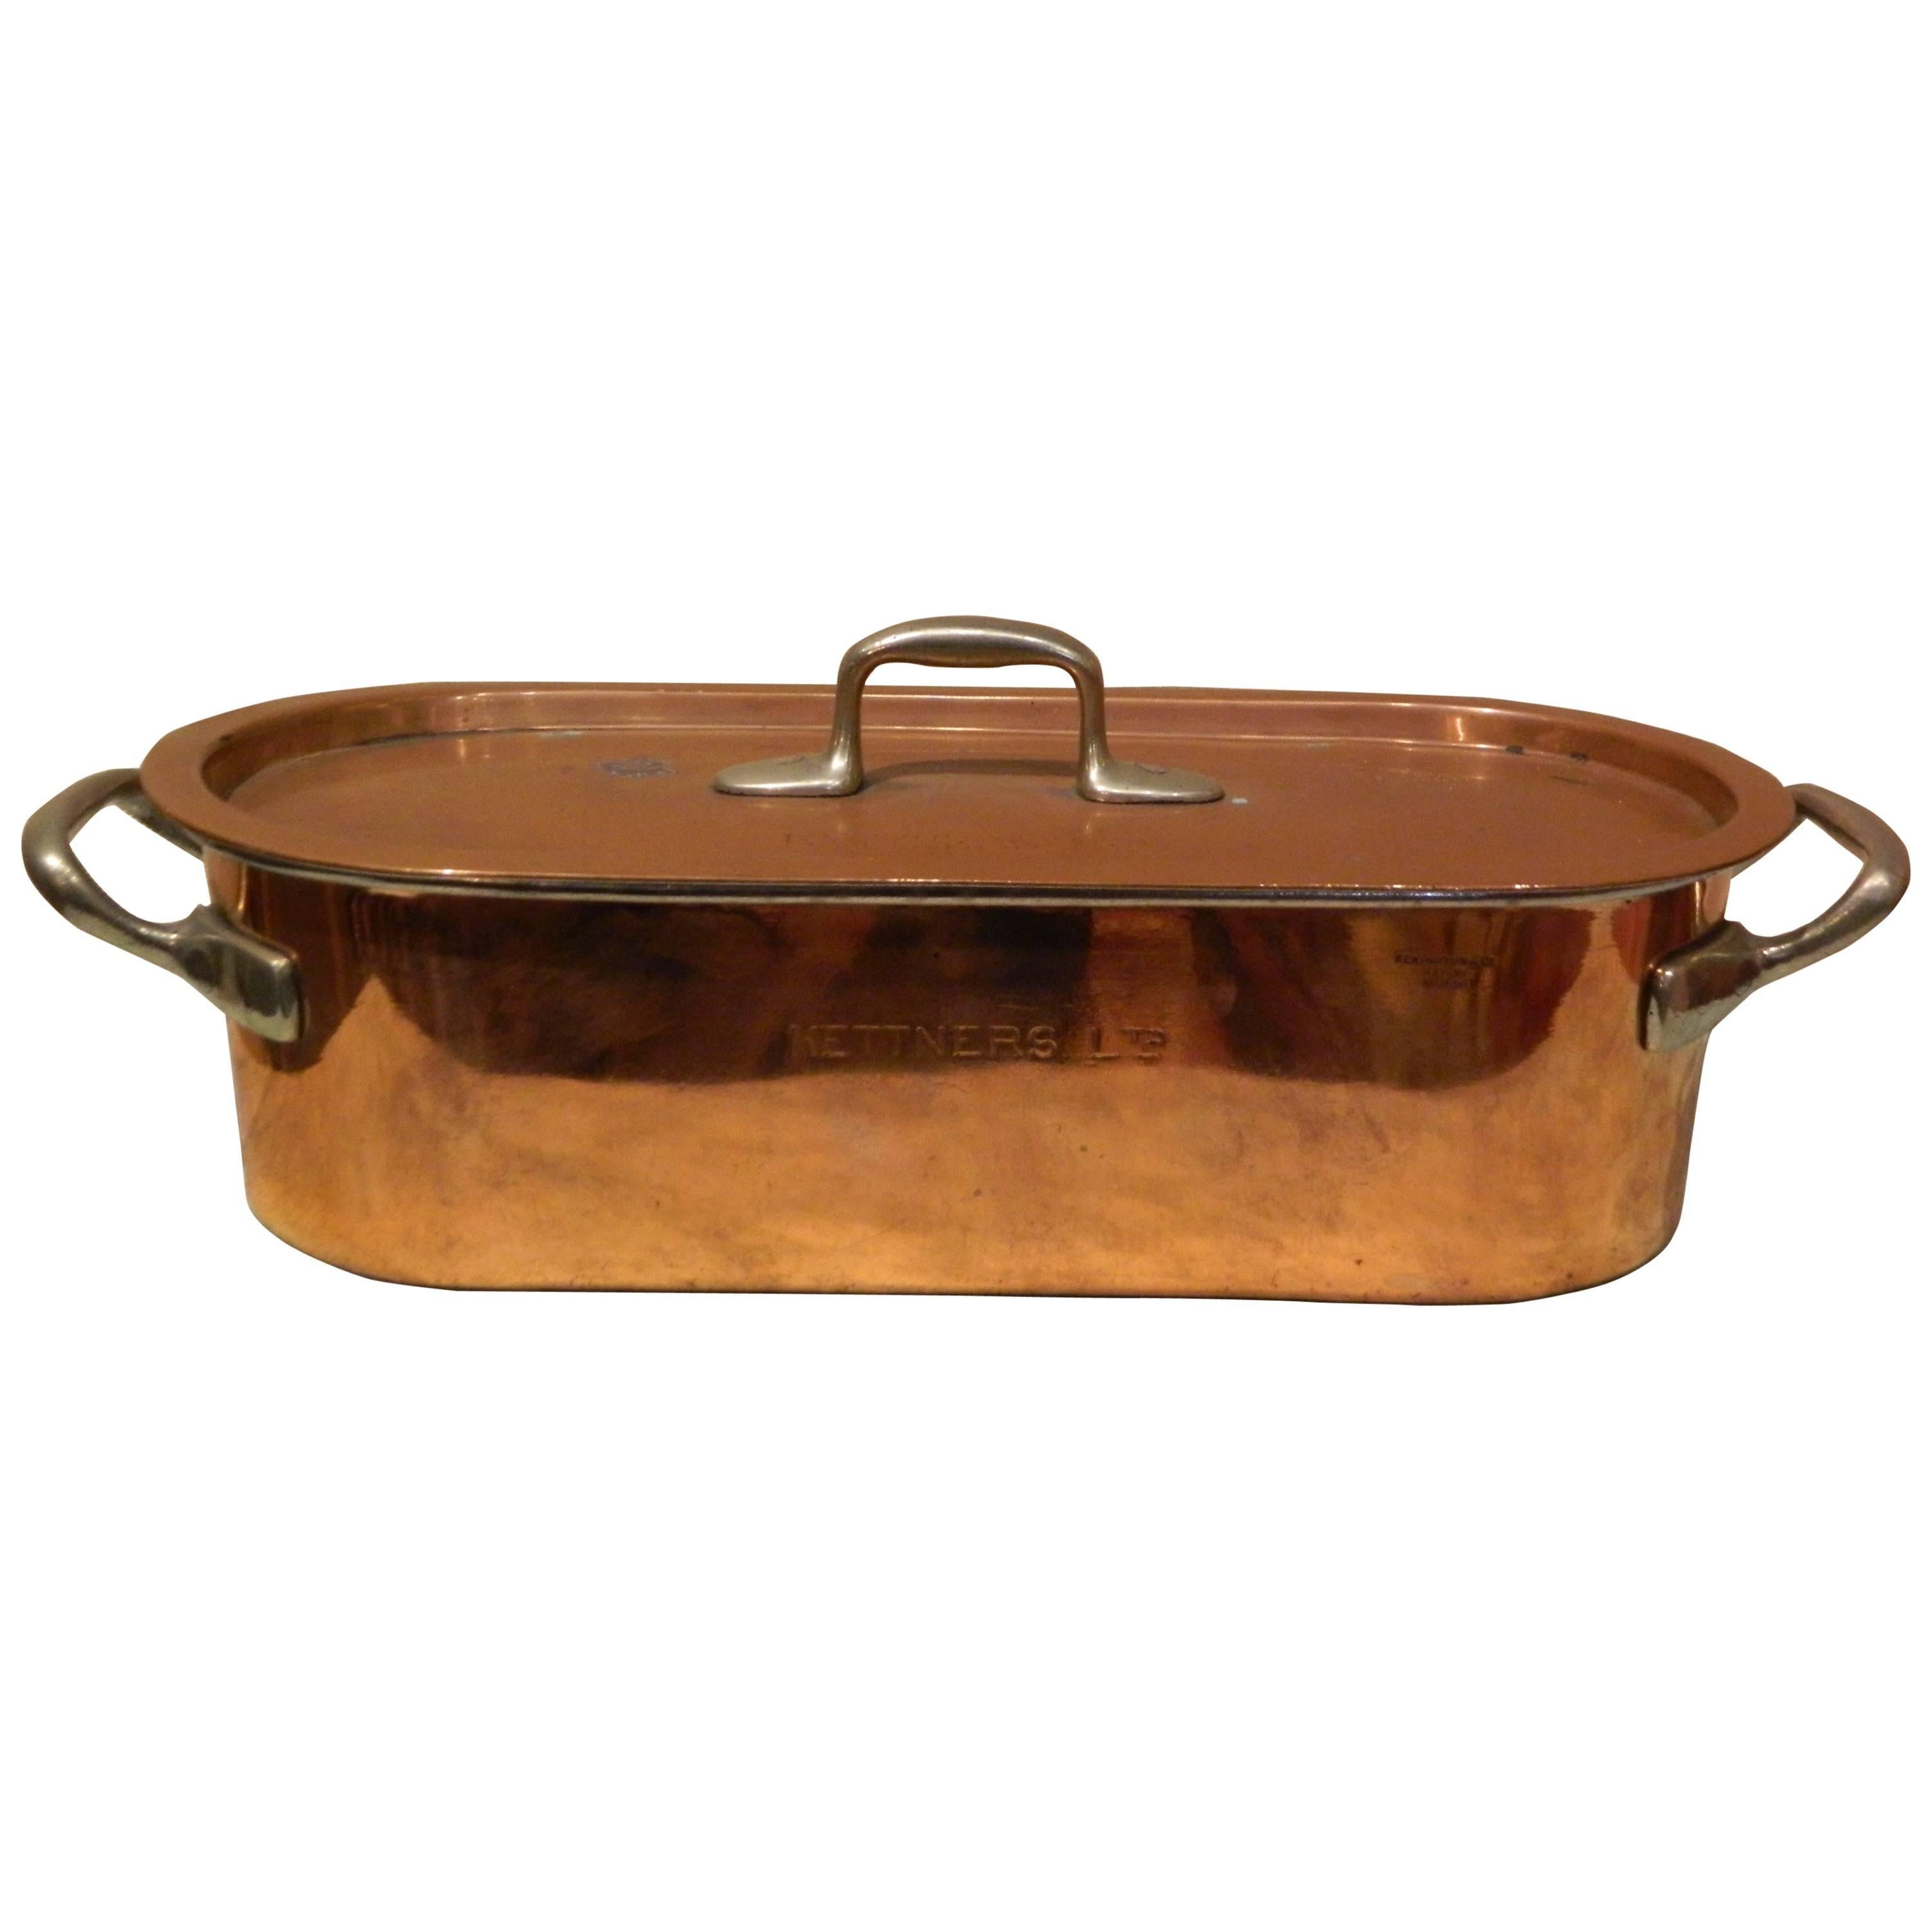 French Copper Fish Poacher with Handles and Lid, 19th Century